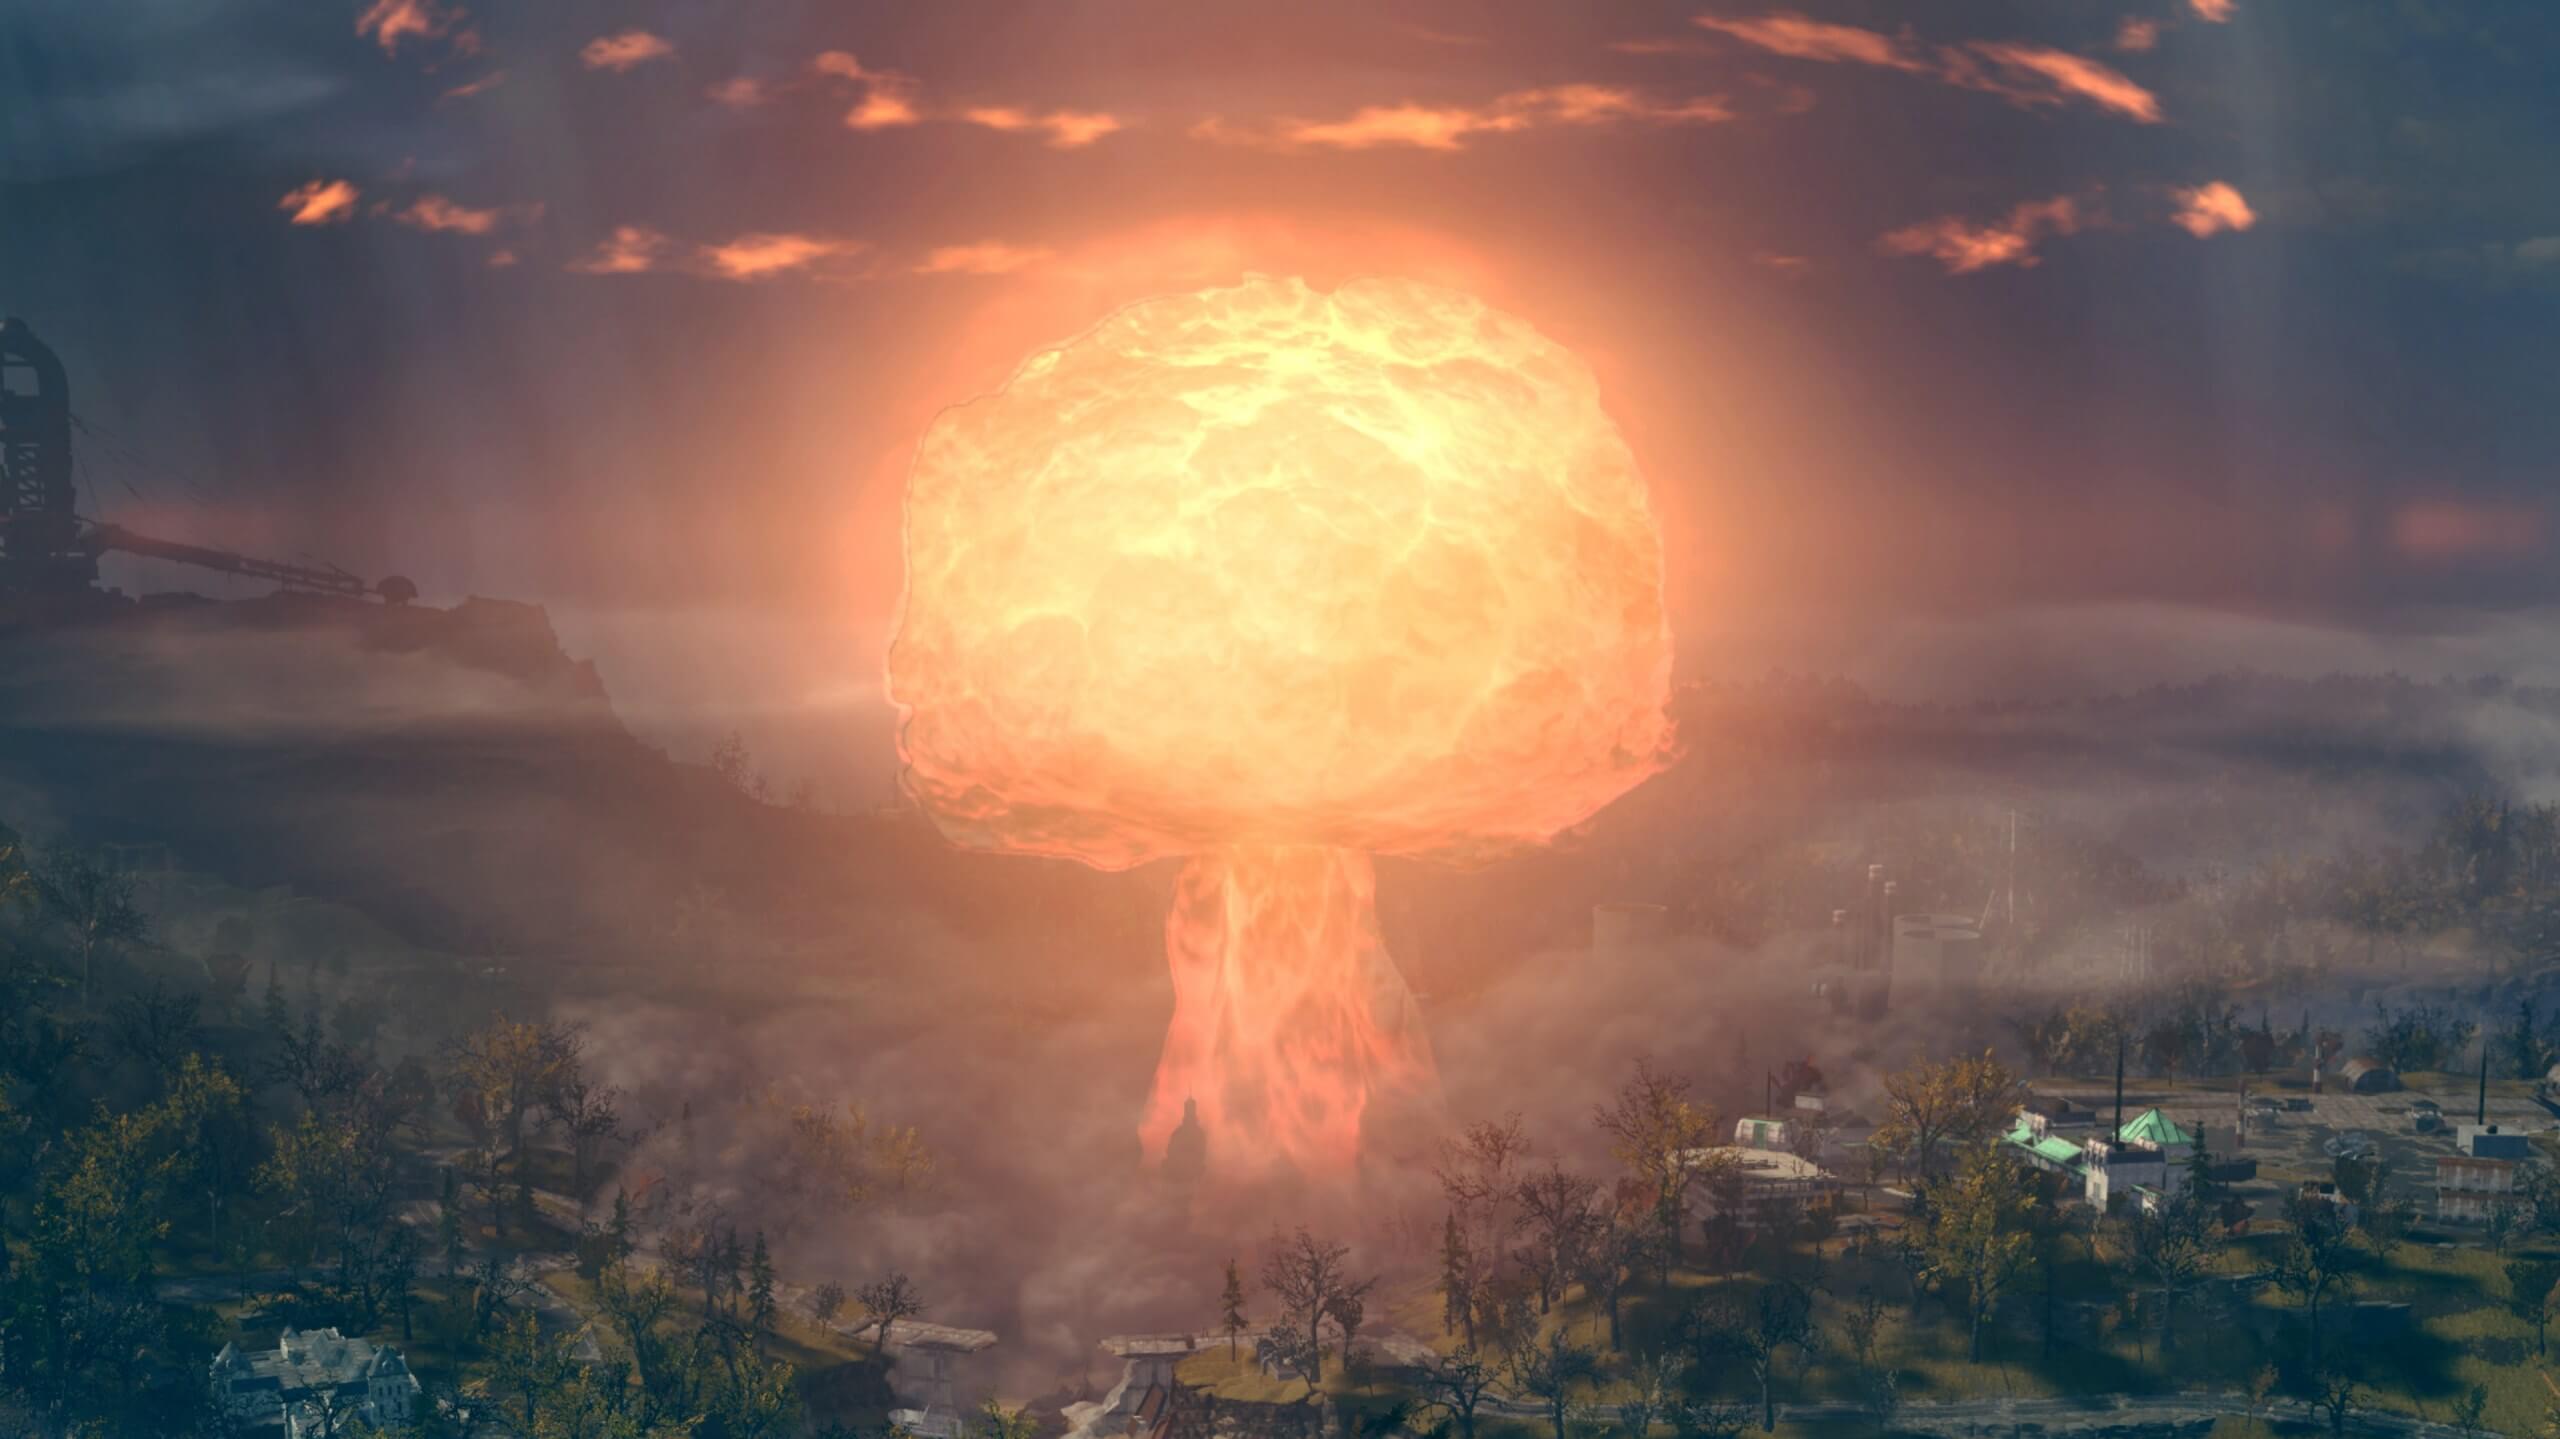 Fallout 76 players built a tool to help decrypt nuke launch codes